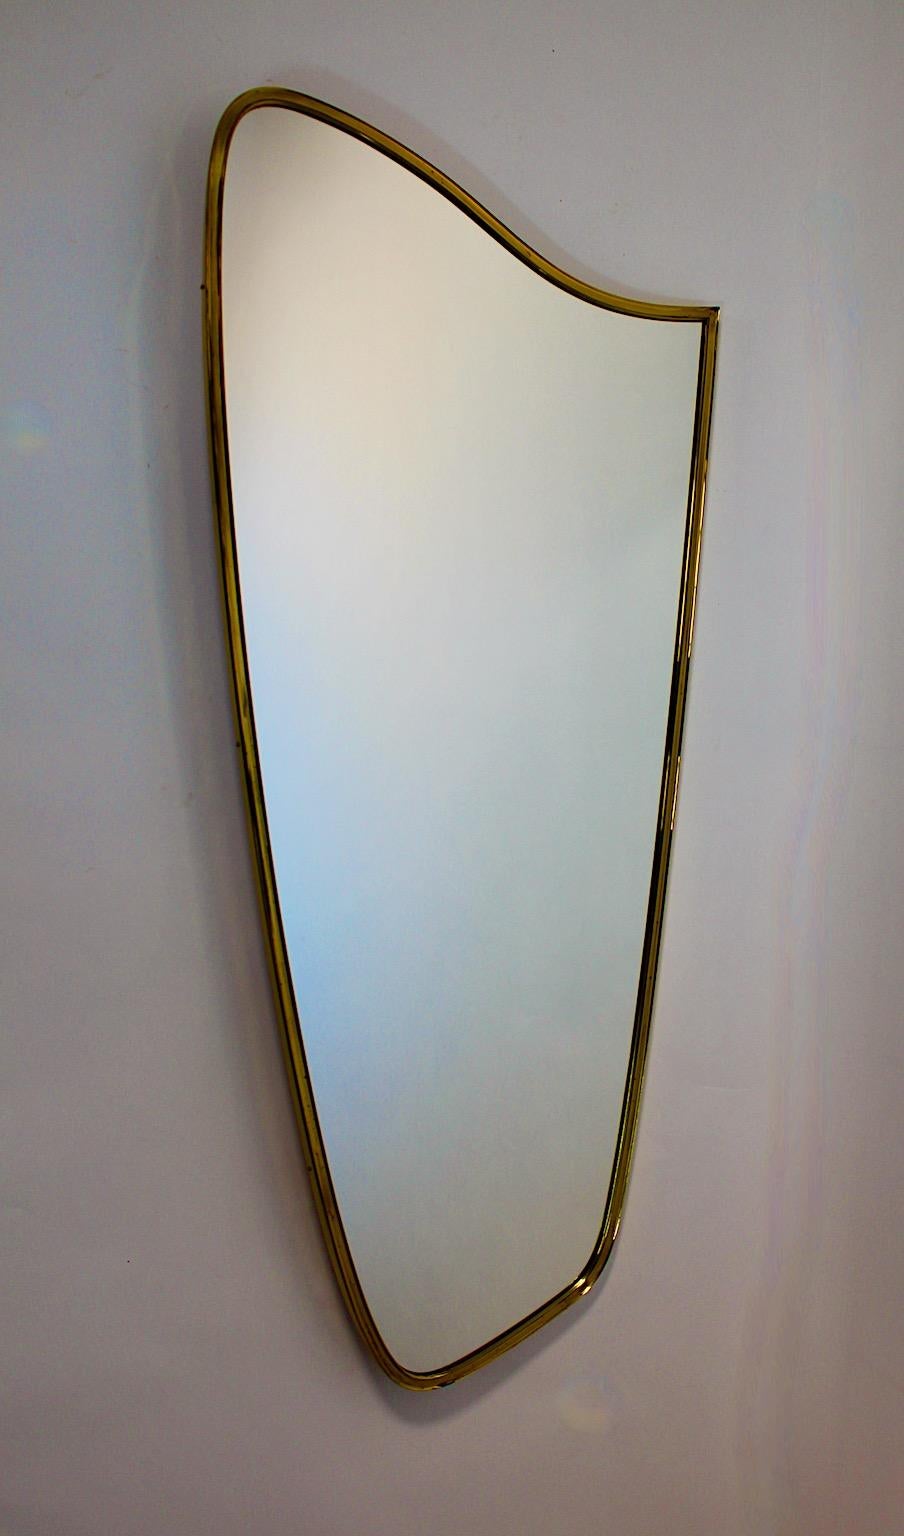 Mid-Century Modern vintage floor mirror or full length mirror from brass and mirror 1950s, Italy.
A stunning floor mirror in beautiful shape with a large Size, which allows to hang up in an entryway or about a fireplace. This floor mirror shows a